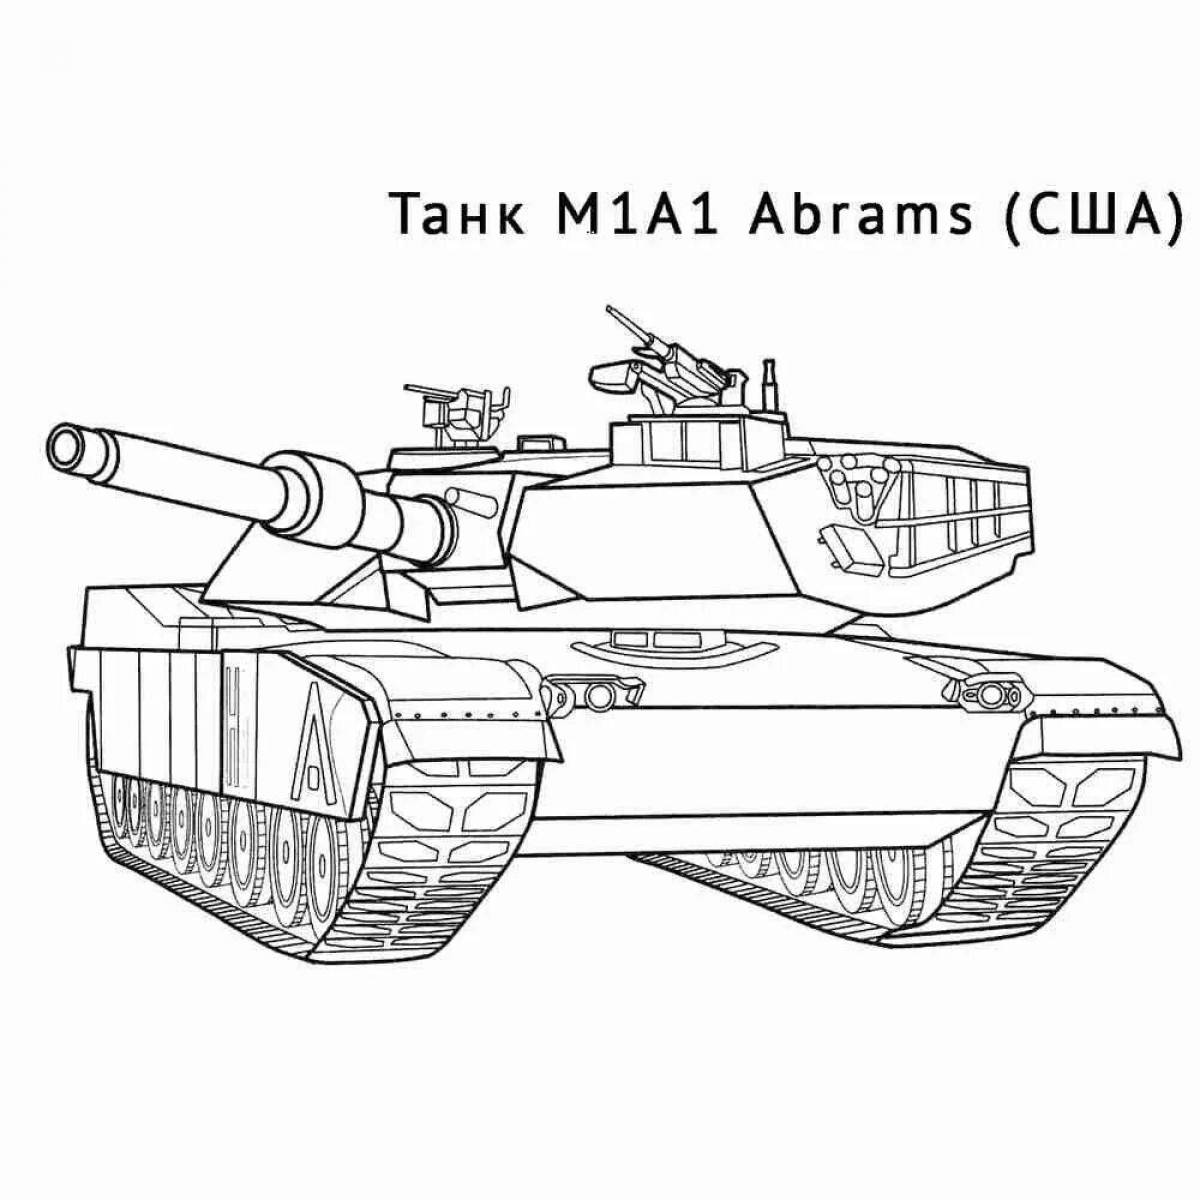 Coloring book of joyful troublesome tank